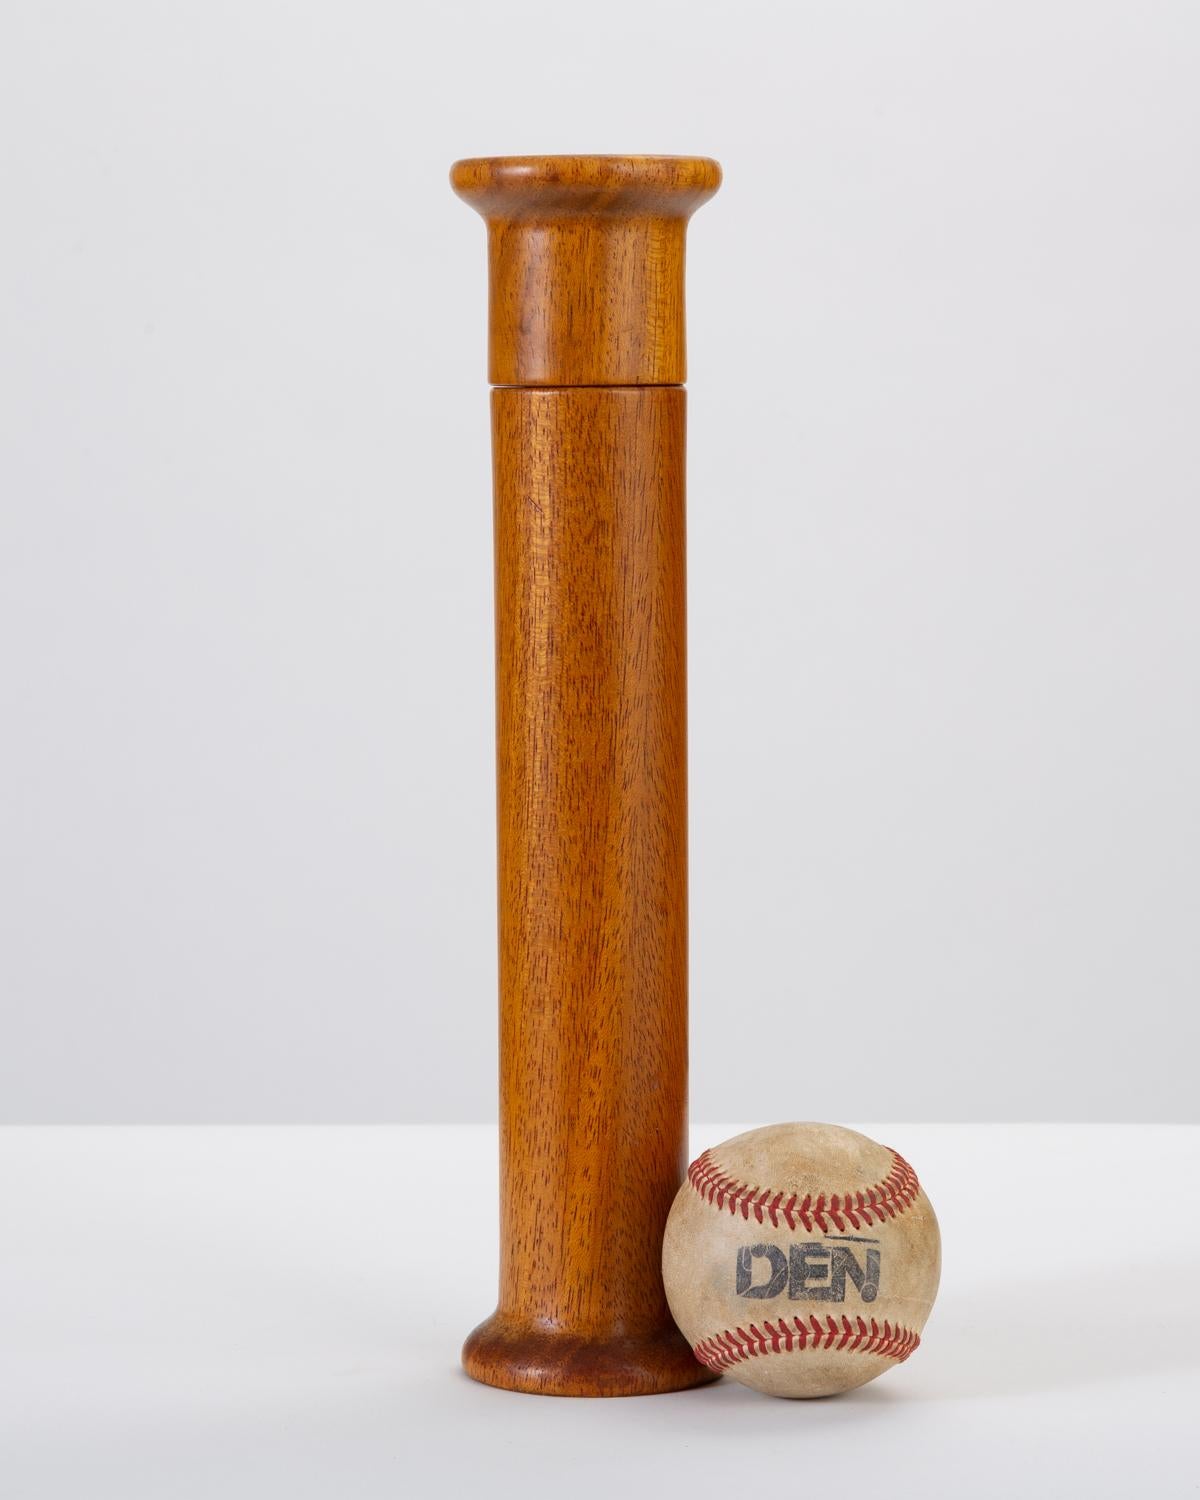 A tall, midcentury pepper mill from Italy with a columnar form, widening at either end. Made from beautifully aged oakwood, this item displays subtle grain figuring and plenty of darker rays. A single screw at the rotating upper portion secures the